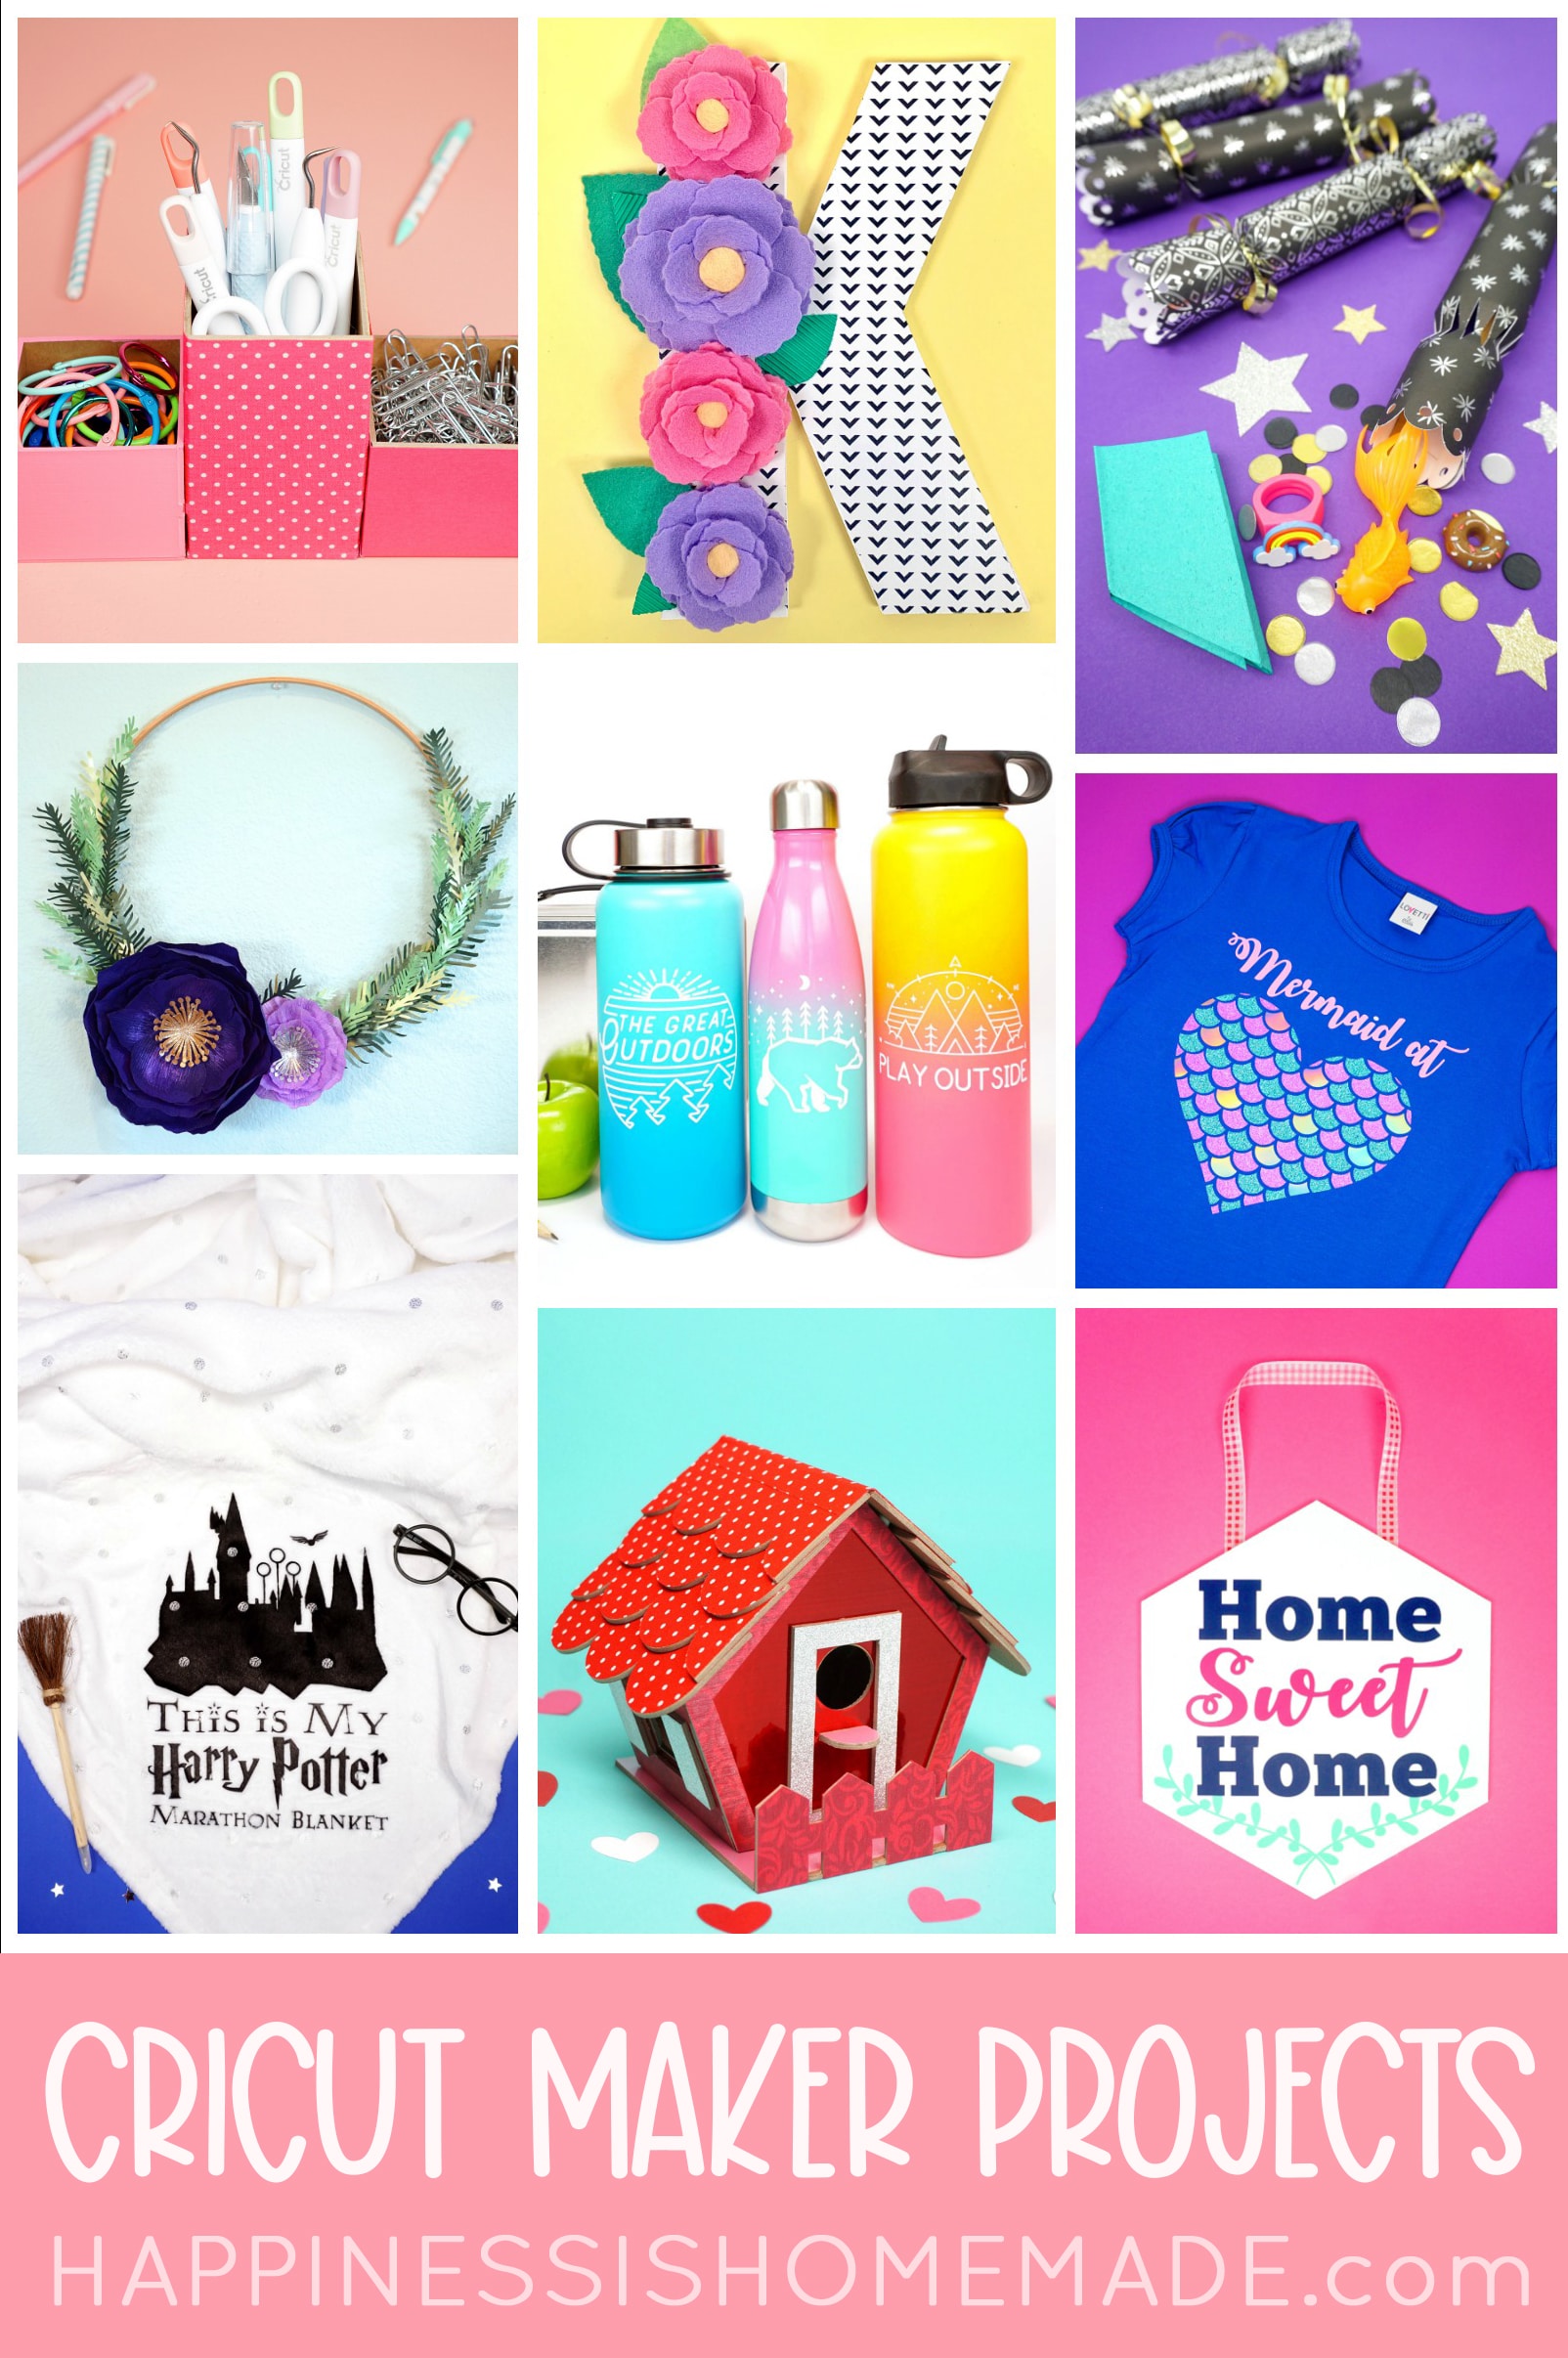 17 Inspiring Cricut Maker Projects - Happiness is Homemade